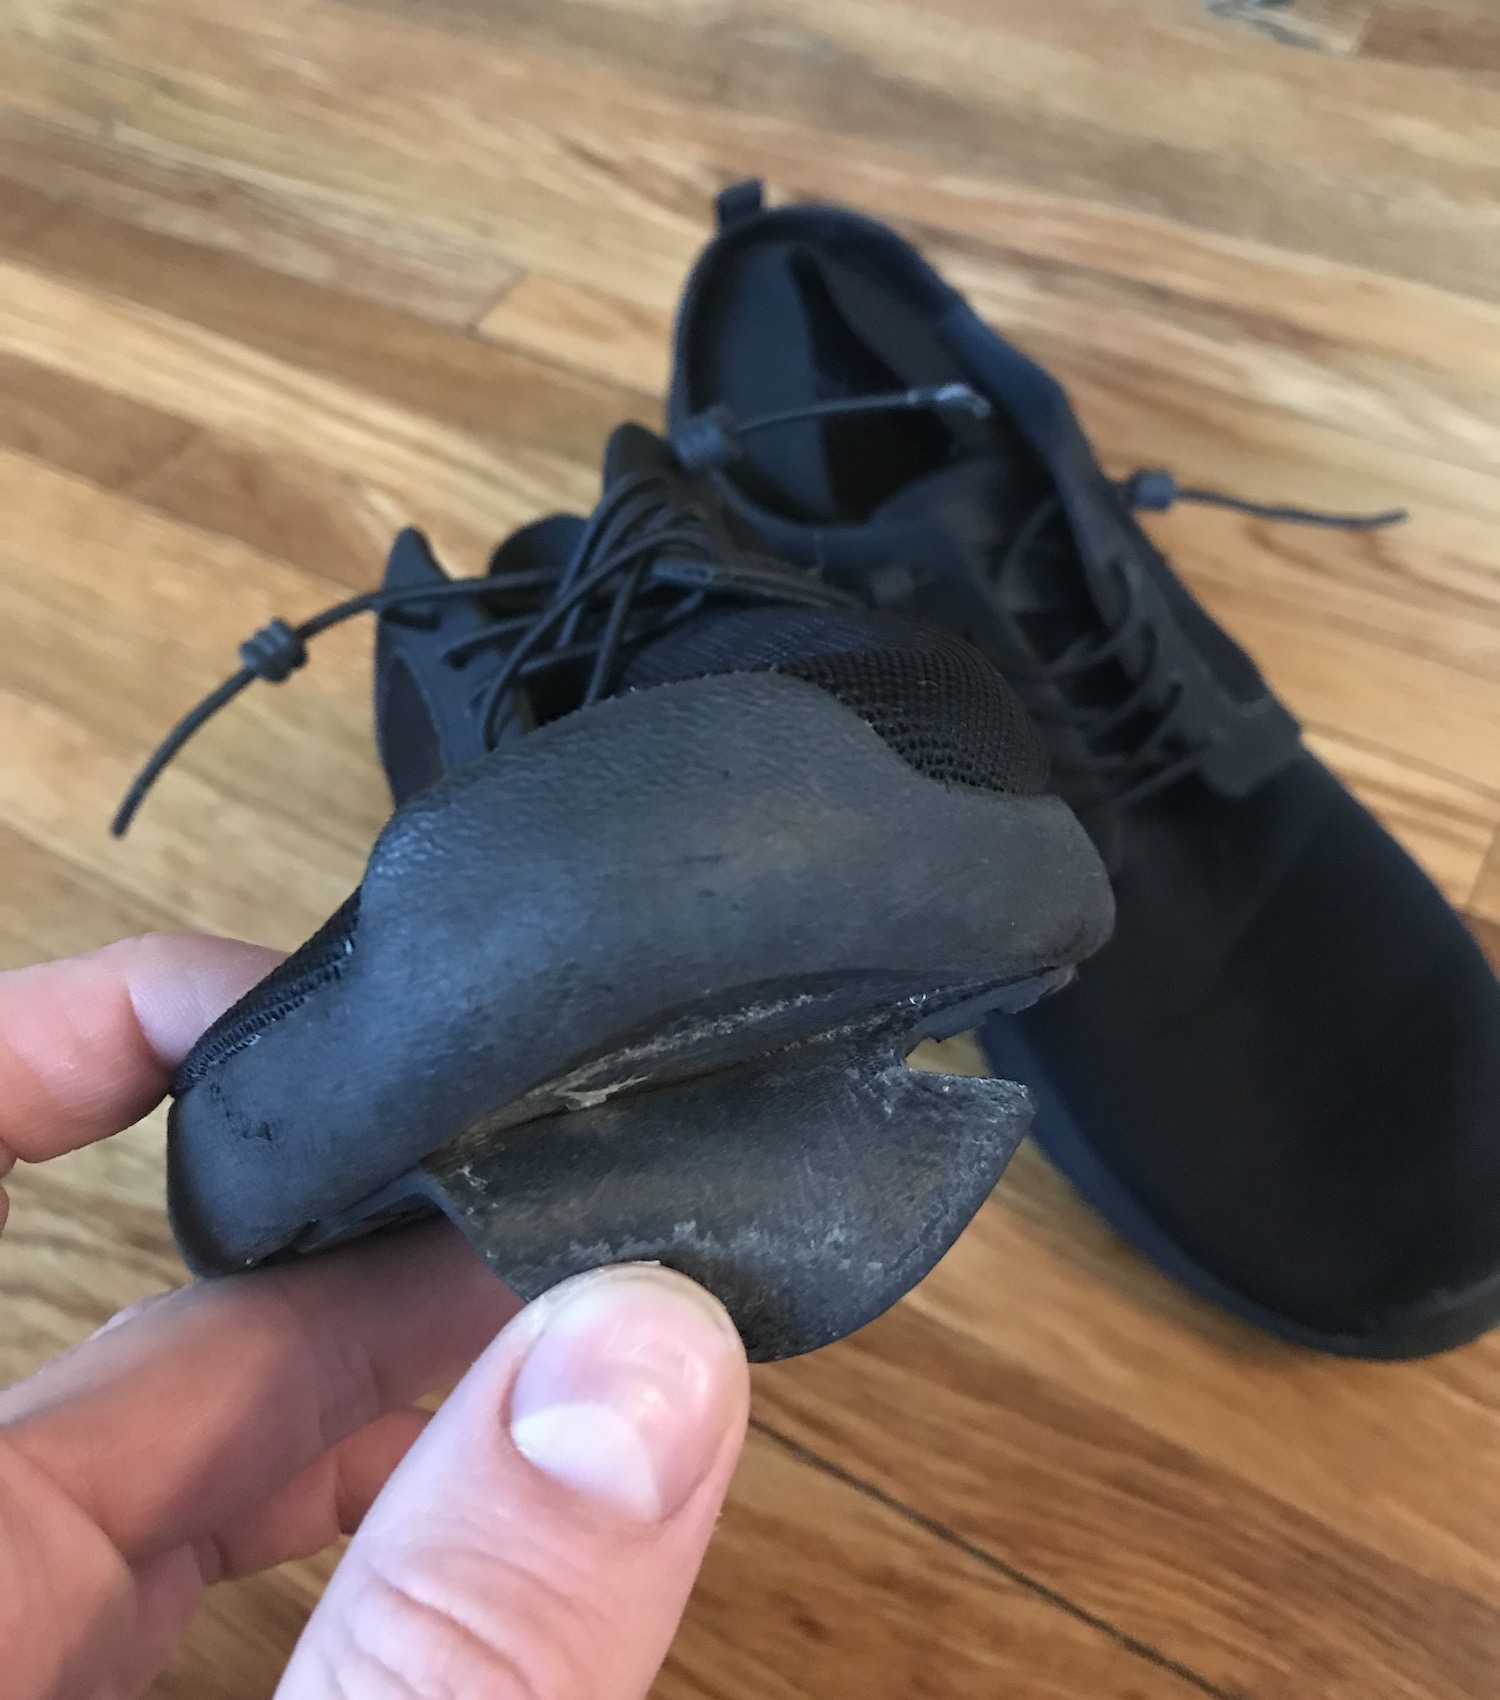 Tropicfeel Canyon Review The Ultimate Travel Shoe